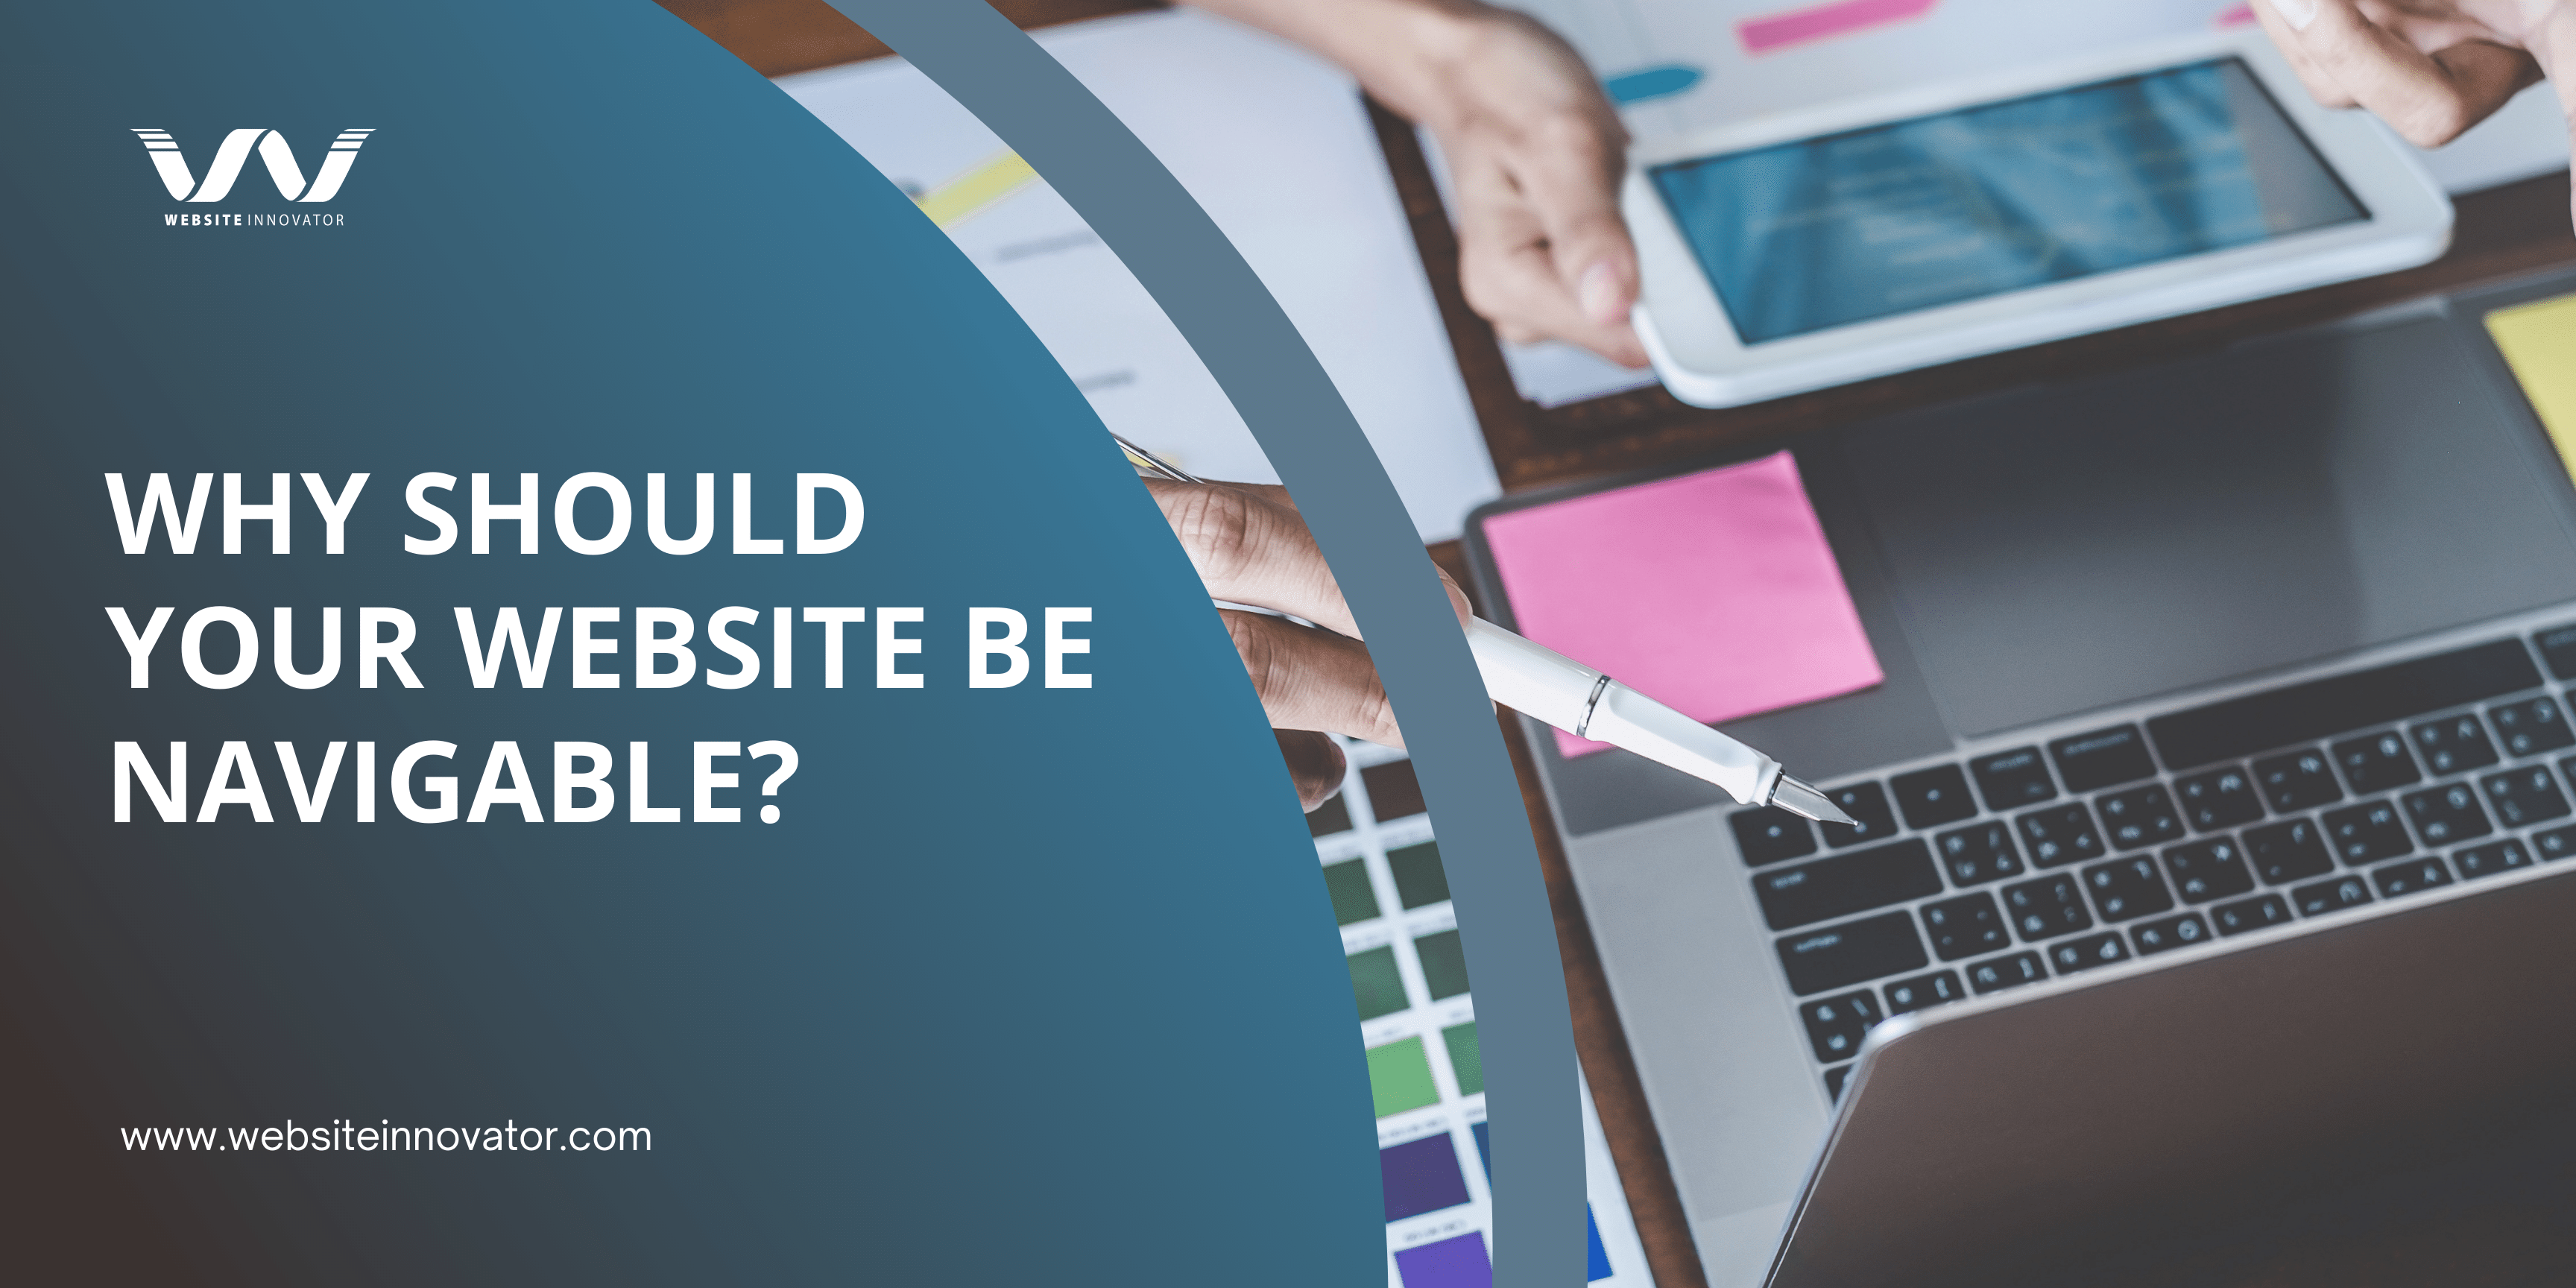 Why should your website be navigable?